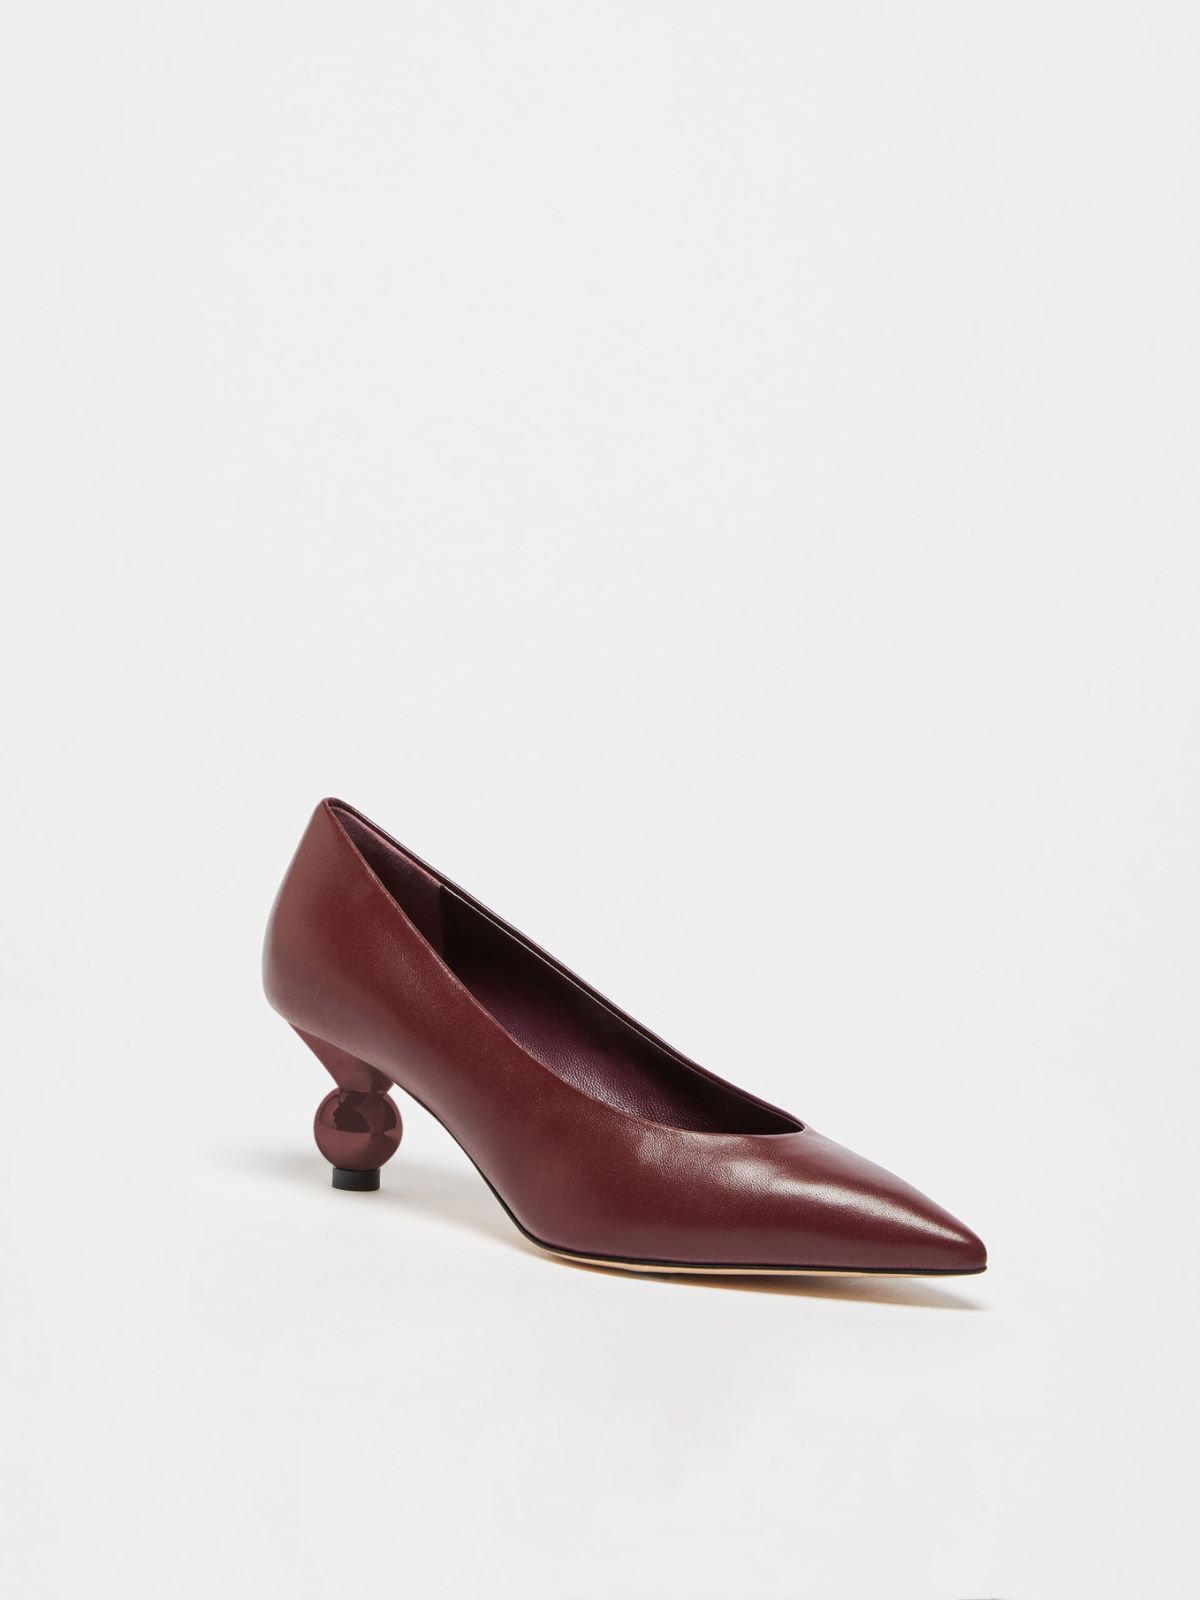 Nappa leather court shoes - BORDEAUX - Weekend Max Mara - 2